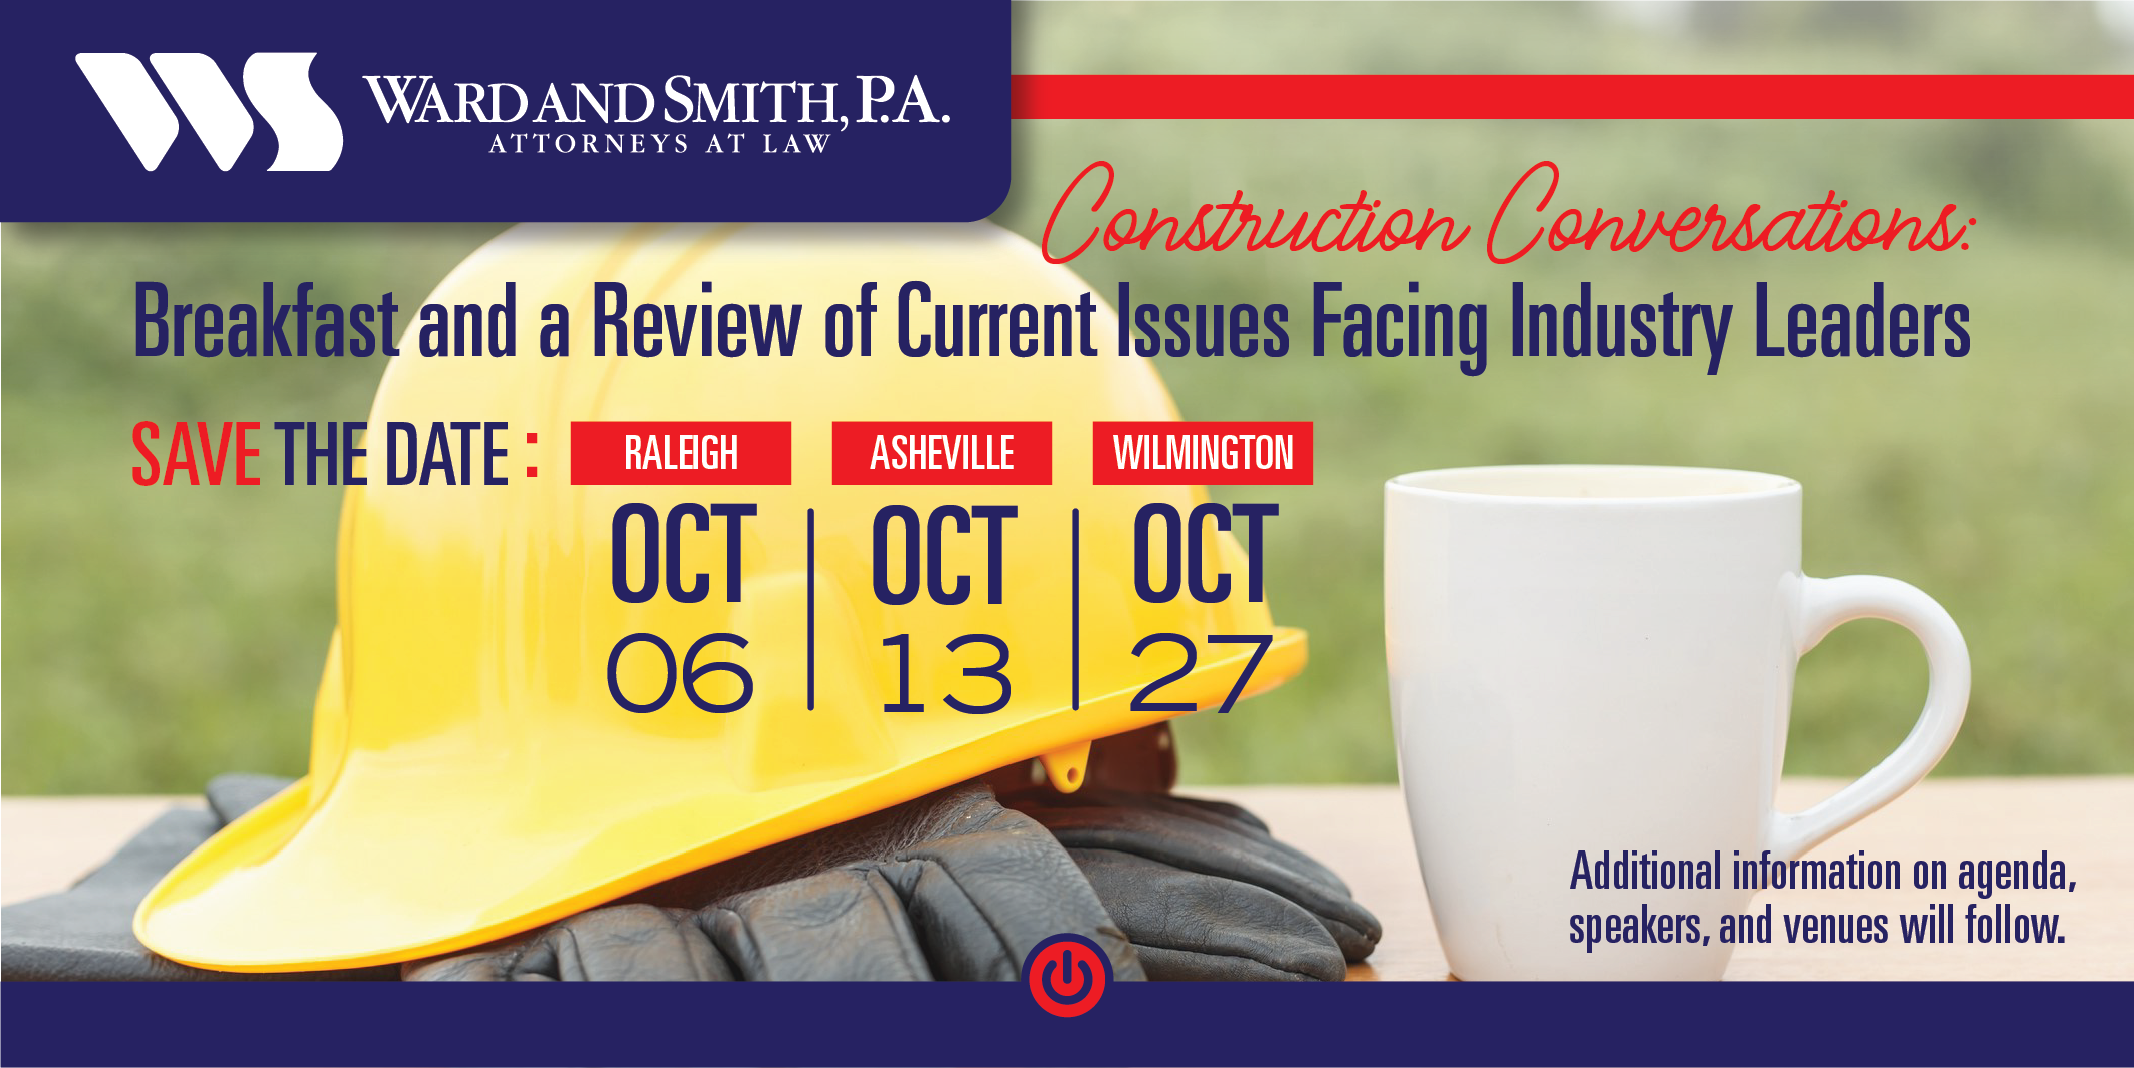 Construction Conversations Save the Date